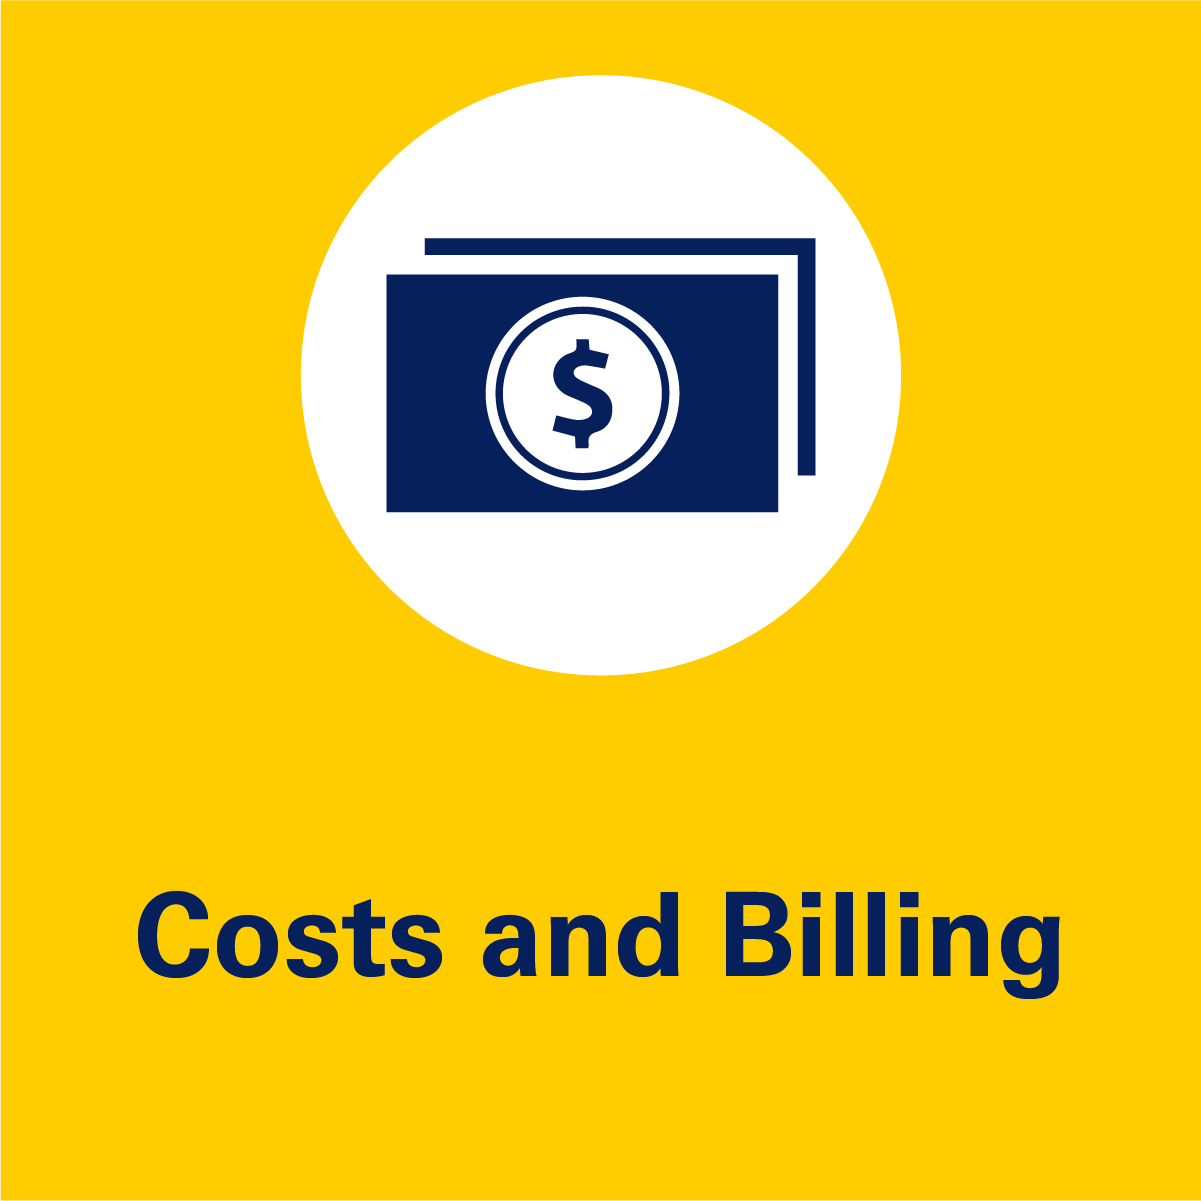 Costs and Billing